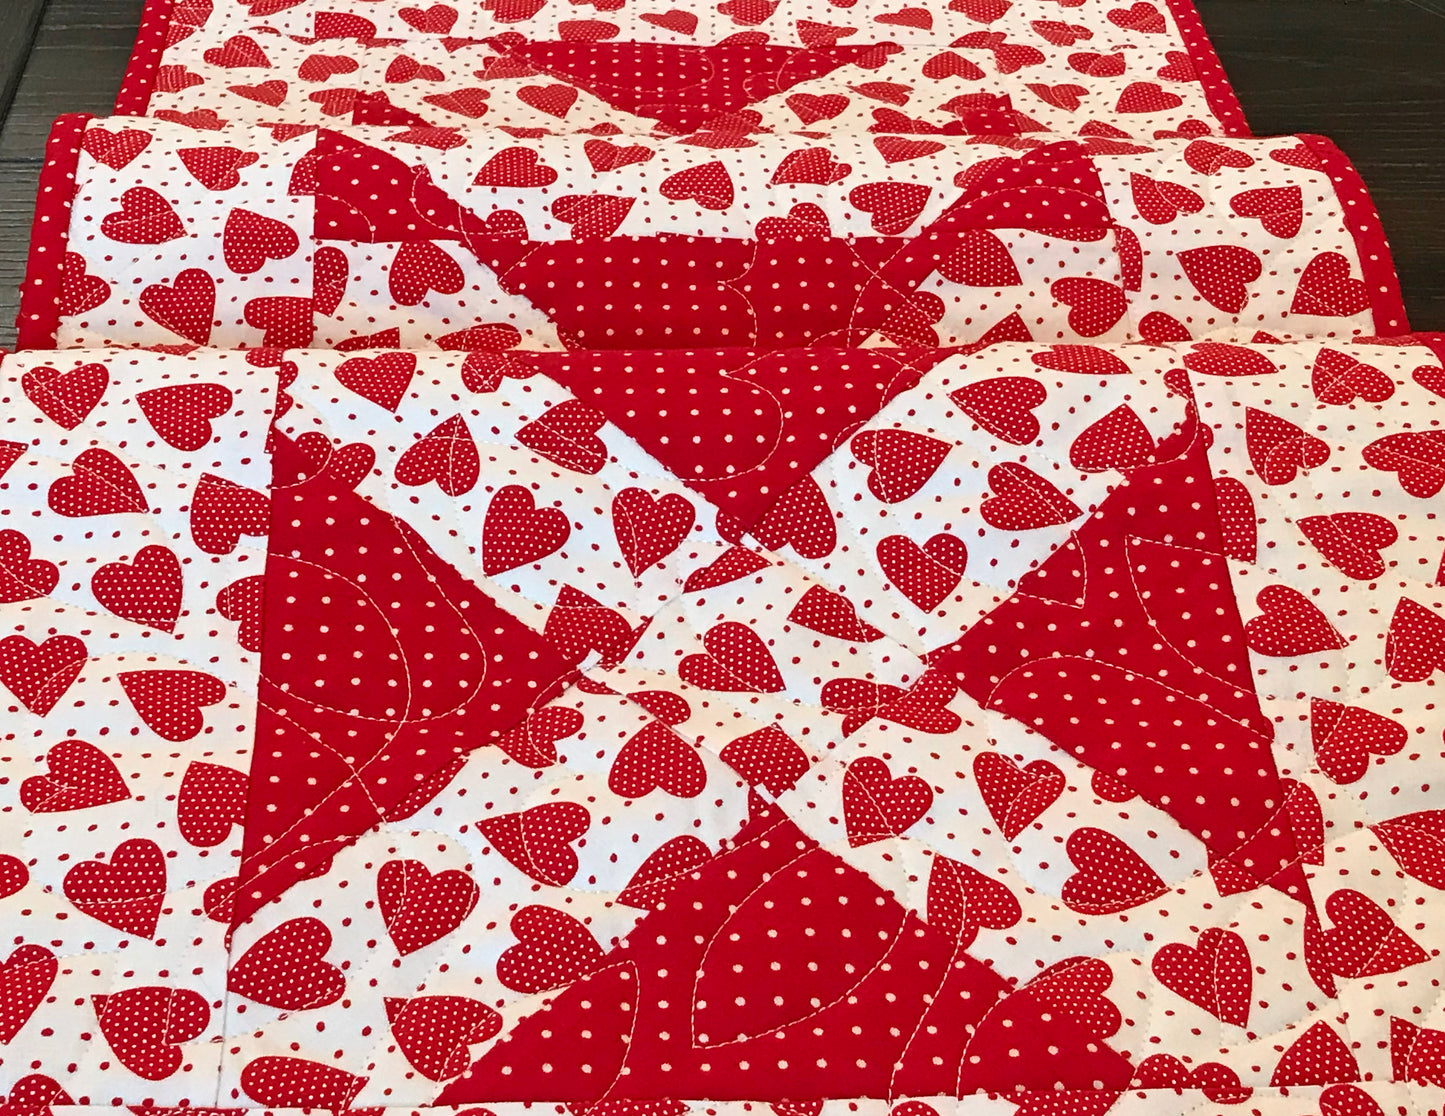 Hugs & Kisses Valentine's Day Table Runner Pattern - Digital Pattern - Handmade Quilts, Digital Patterns, and Home Décor items online - Cuddle Cat Quiltworks